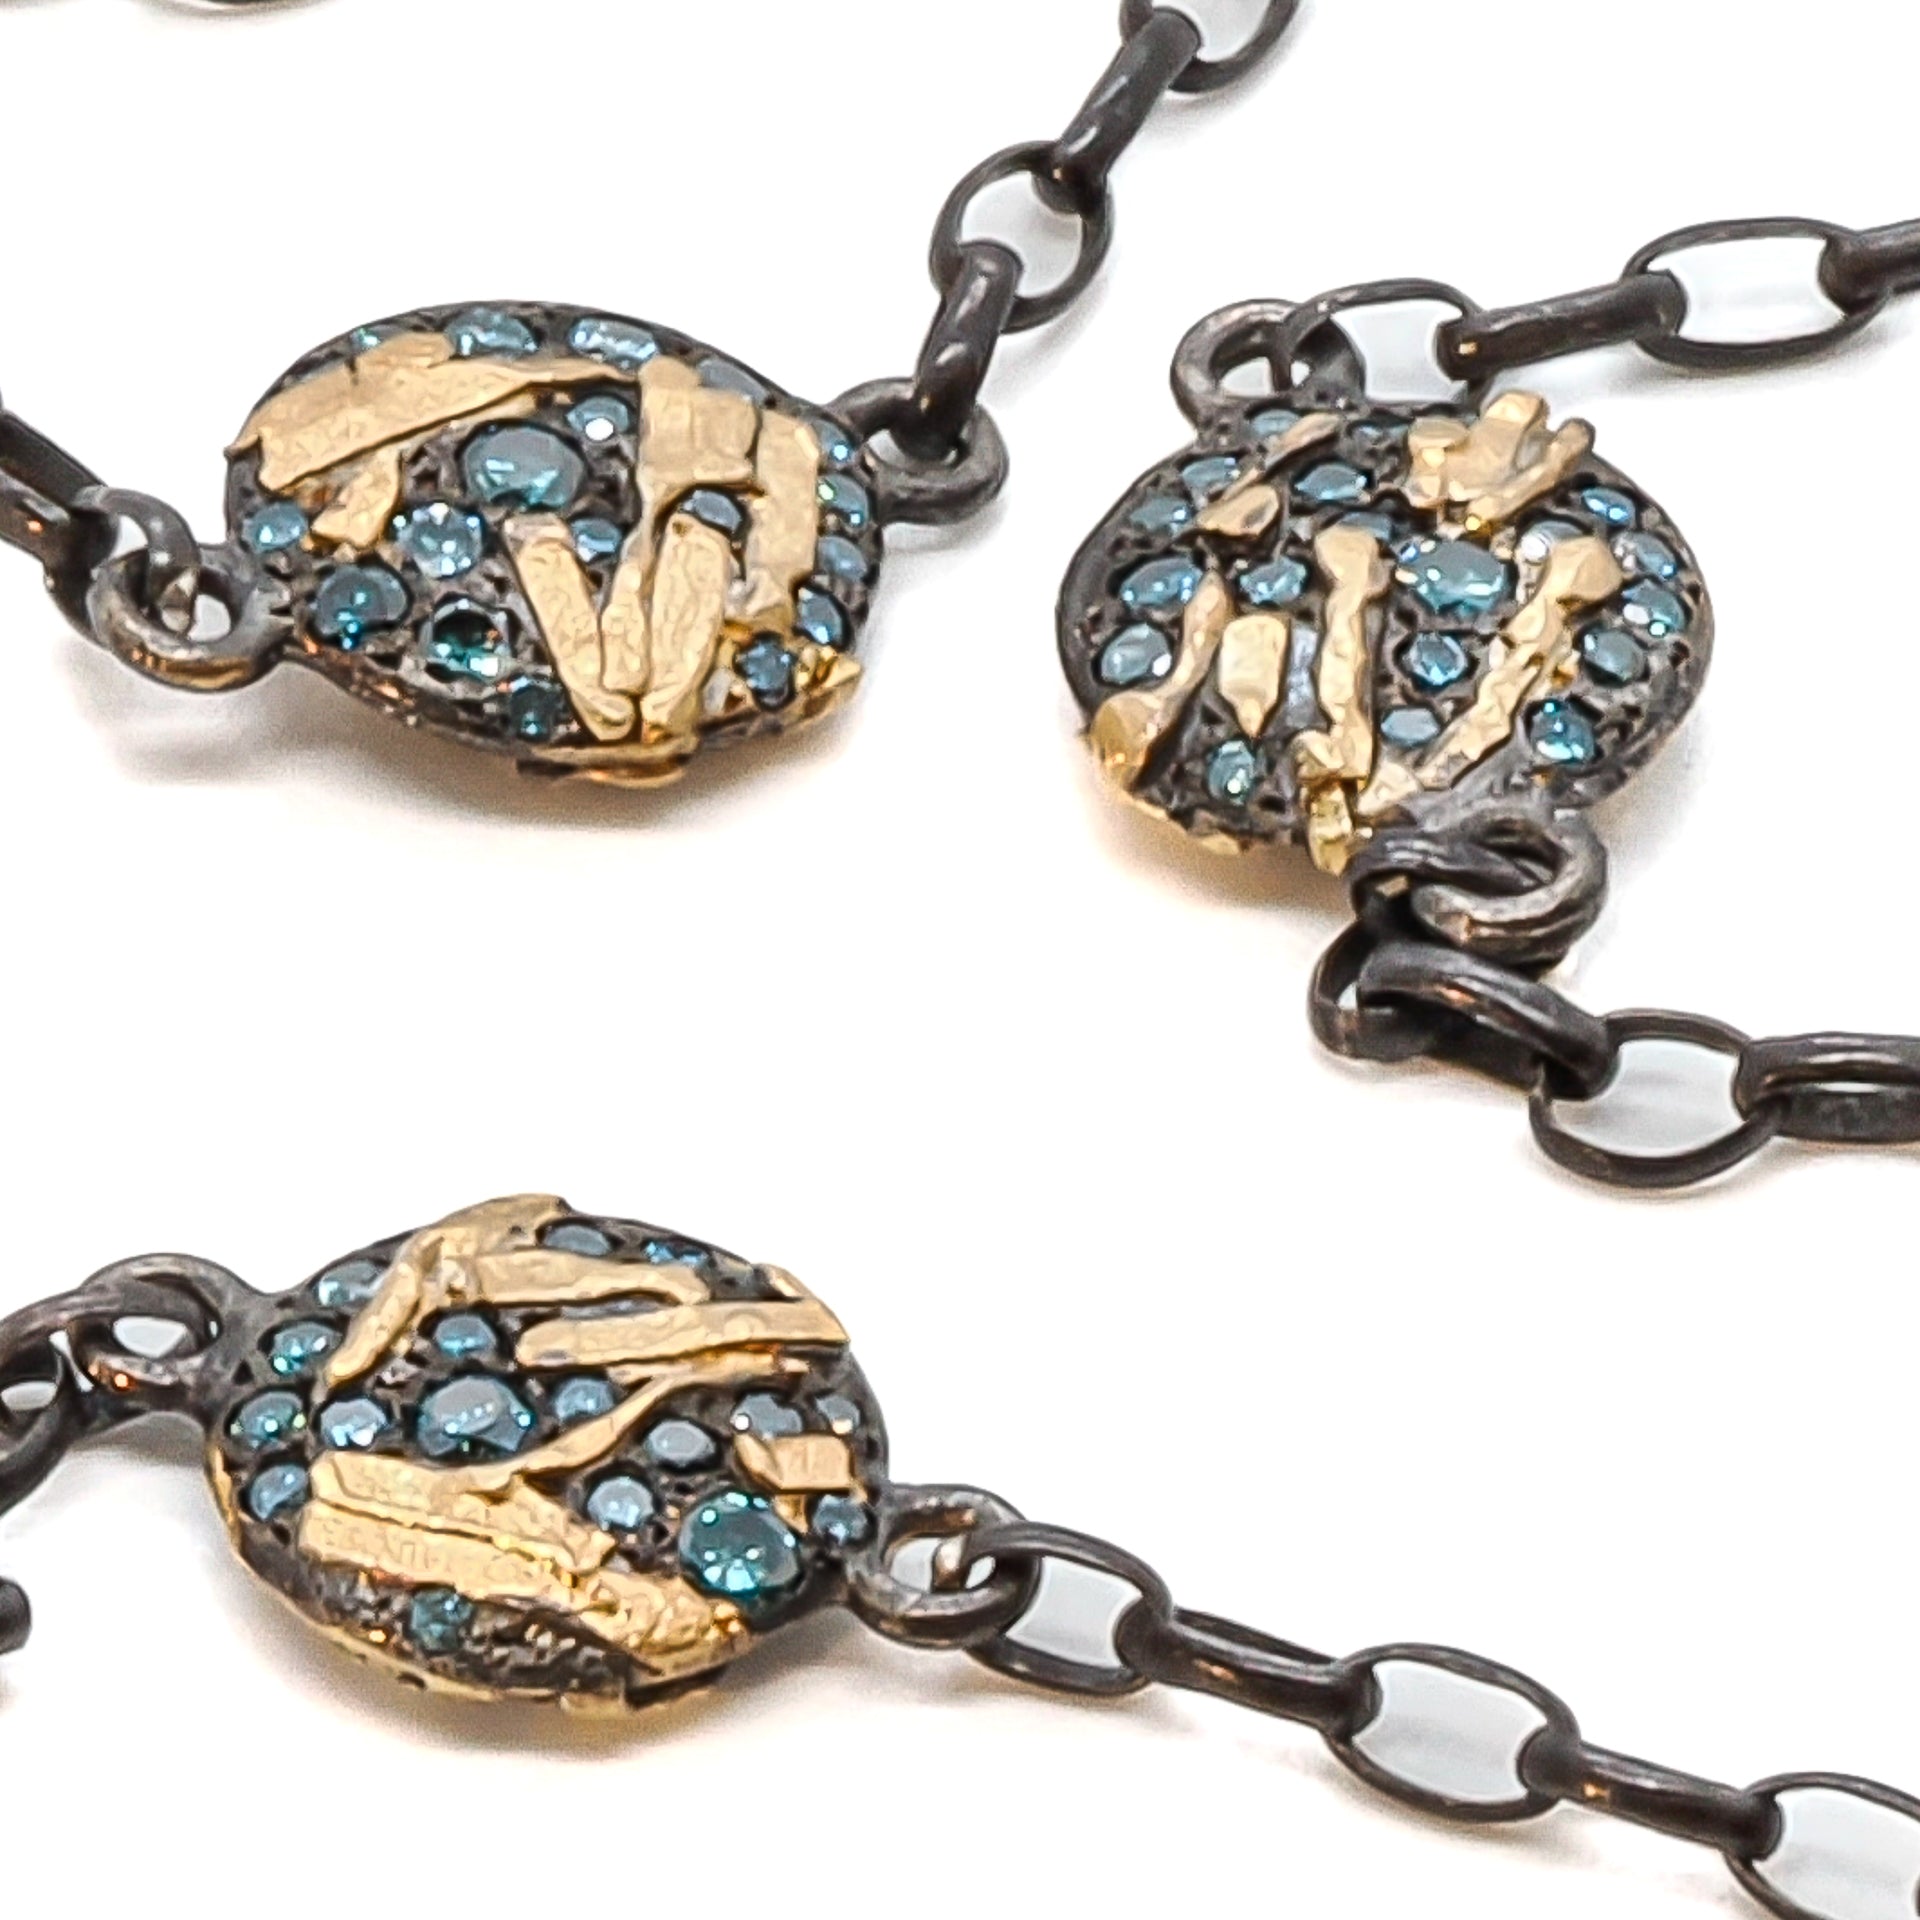 Detailed shot of the round links of the Nature Round Link Necklace, highlighting their luxurious and unique appeal.